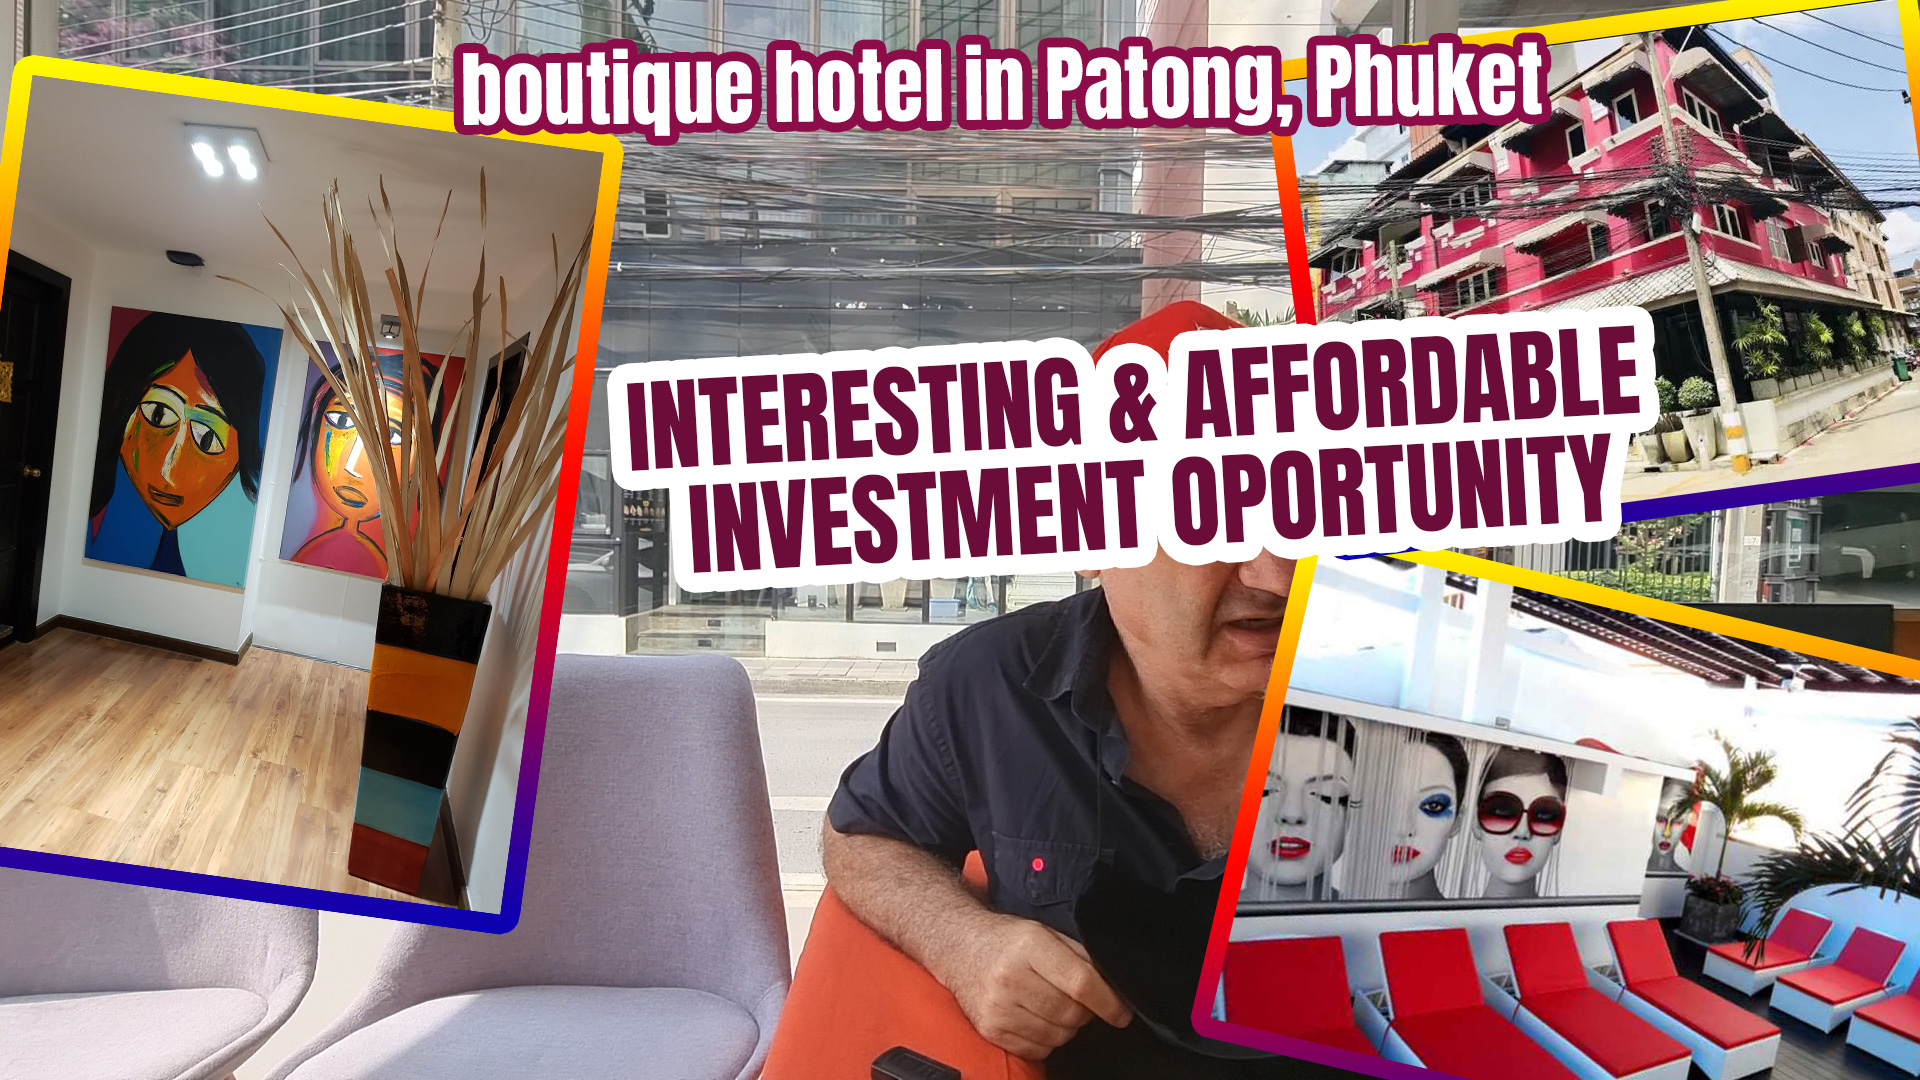 Boutique hotel in Phuket for sale